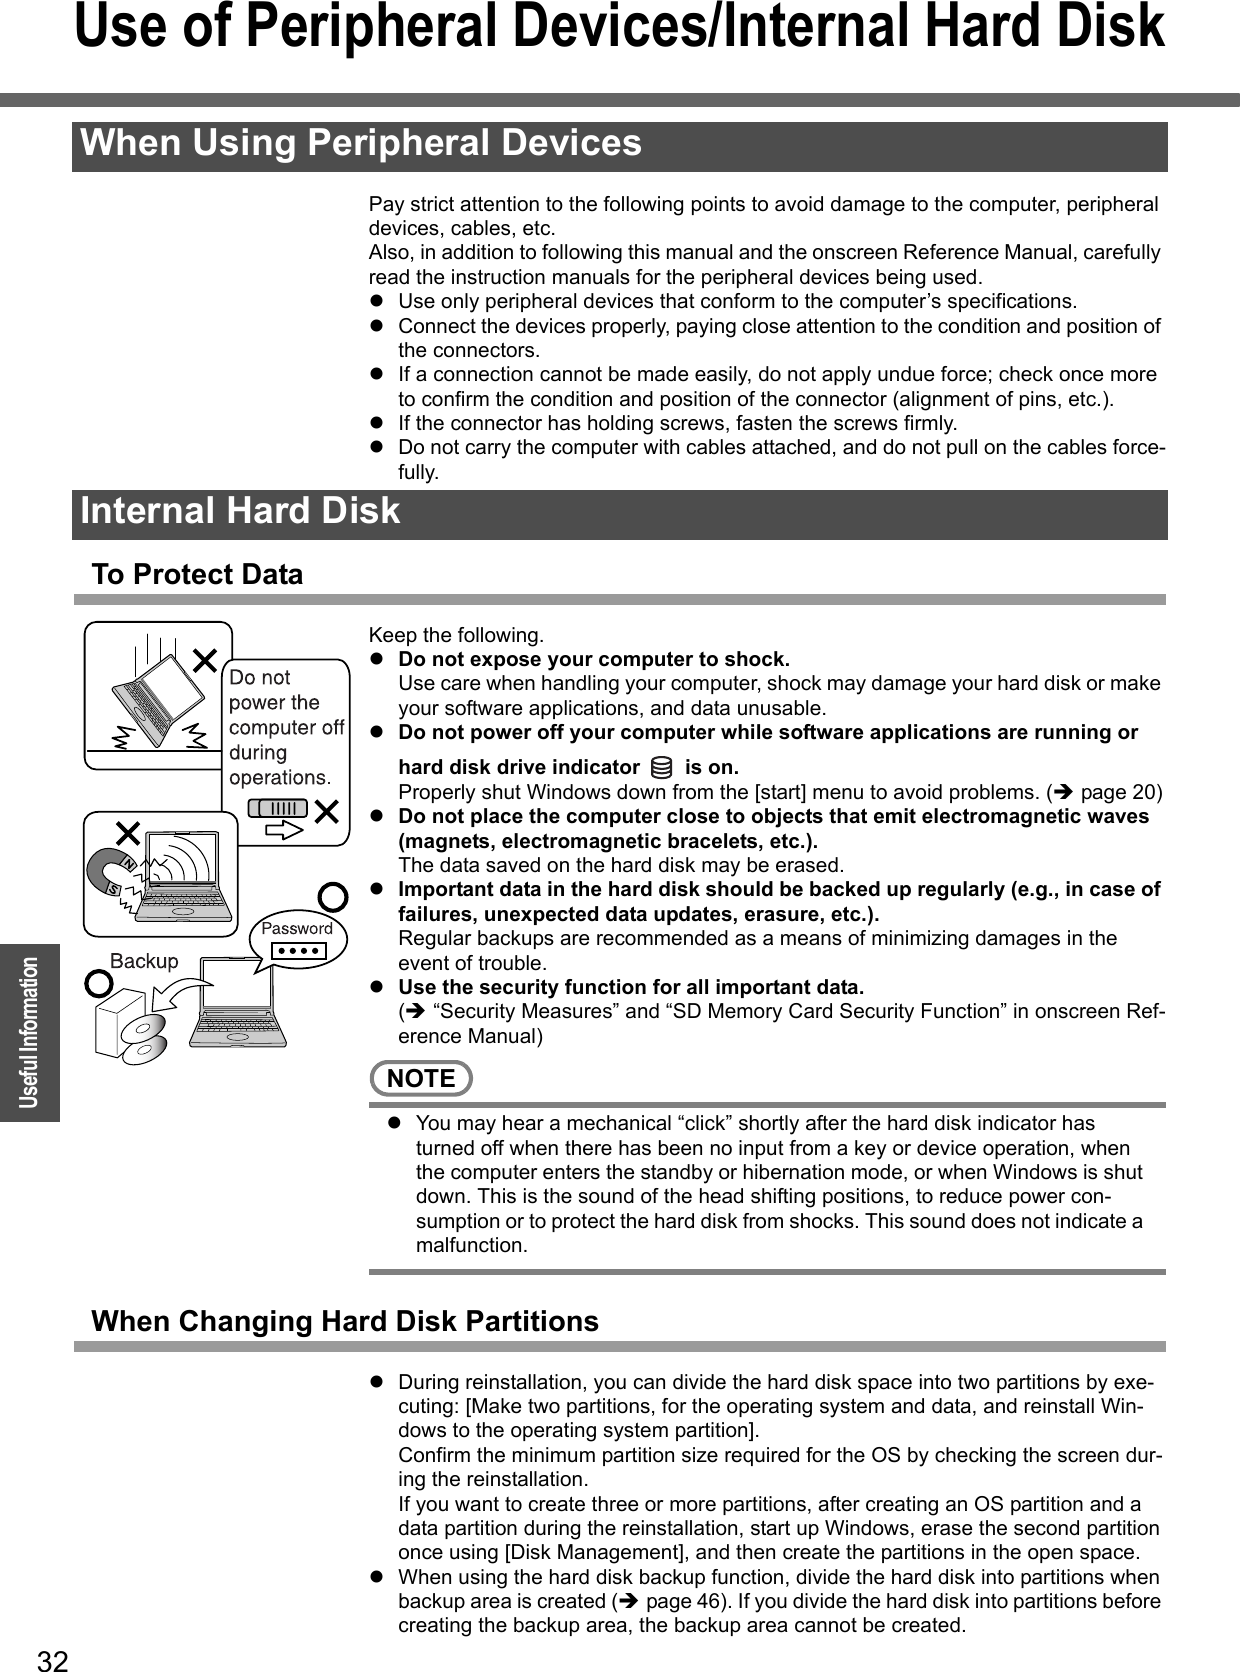 32OperationUseful InformationUse of Peripheral Devices/Internal Hard DiskPay strict attention to the following points to avoid damage to the computer, peripheral devices, cables, etc.Also, in addition to following this manual and the onscreen Reference Manual, carefully read the instruction manuals for the peripheral devices being used.zUse only peripheral devices that conform to the computer’s specifications.zConnect the devices properly, paying close attention to the condition and position of the connectors.zIf a connection cannot be made easily, do not apply undue force; check once more to confirm the condition and position of the connector (alignment of pins, etc.).zIf the connector has holding screws, fasten the screws firmly.zDo not carry the computer with cables attached, and do not pull on the cables force-fully.To Protect DataKeep the following.zDo not expose your computer to shock.Use care when handling your computer, shock may damage your hard disk or make your software applications, and data unusable.zDo not power off your computer while software applications are running or hard disk drive indicator   is on. Properly shut Windows down from the [start] menu to avoid problems. (Îpage 20)zDo not place the computer close to objects that emit electromagnetic waves (magnets, electromagnetic bracelets, etc.).The data saved on the hard disk may be erased.zImportant data in the hard disk should be backed up regularly (e.g., in case of failures, unexpected data updates, erasure, etc.).Regular backups are recommended as a means of minimizing damages in the event of trouble.zUse the security function for all important data.(Î “Security Measures” and “SD Memory Card Security Function” in onscreen Ref-erence Manual)NOTEzYou may hear a mechanical “click” shortly after the hard disk indicator has turned off when there has been no input from a key or device operation, when the computer enters the standby or hibernation mode, or when Windows is shut down. This is the sound of the head shifting positions, to reduce power con-sumption or to protect the hard disk from shocks. This sound does not indicate a malfunction. When Changing Hard Disk PartitionszDuring reinstallation, you can divide the hard disk space into two partitions by exe-cuting: [Make two partitions, for the operating system and data, and reinstall Win-dows to the operating system partition].Confirm the minimum partition size required for the OS by checking the screen dur-ing the reinstallation.If you want to create three or more partitions, after creating an OS partition and a data partition during the reinstallation, start up Windows, erase the second partition once using [Disk Management], and then create the partitions in the open space.zWhen using the hard disk backup function, divide the hard disk into partitions when backup area is created (Îpage 46). If you divide the hard disk into partitions before creating the backup area, the backup area cannot be created.When Using Peripheral DevicesInternal Hard Disk